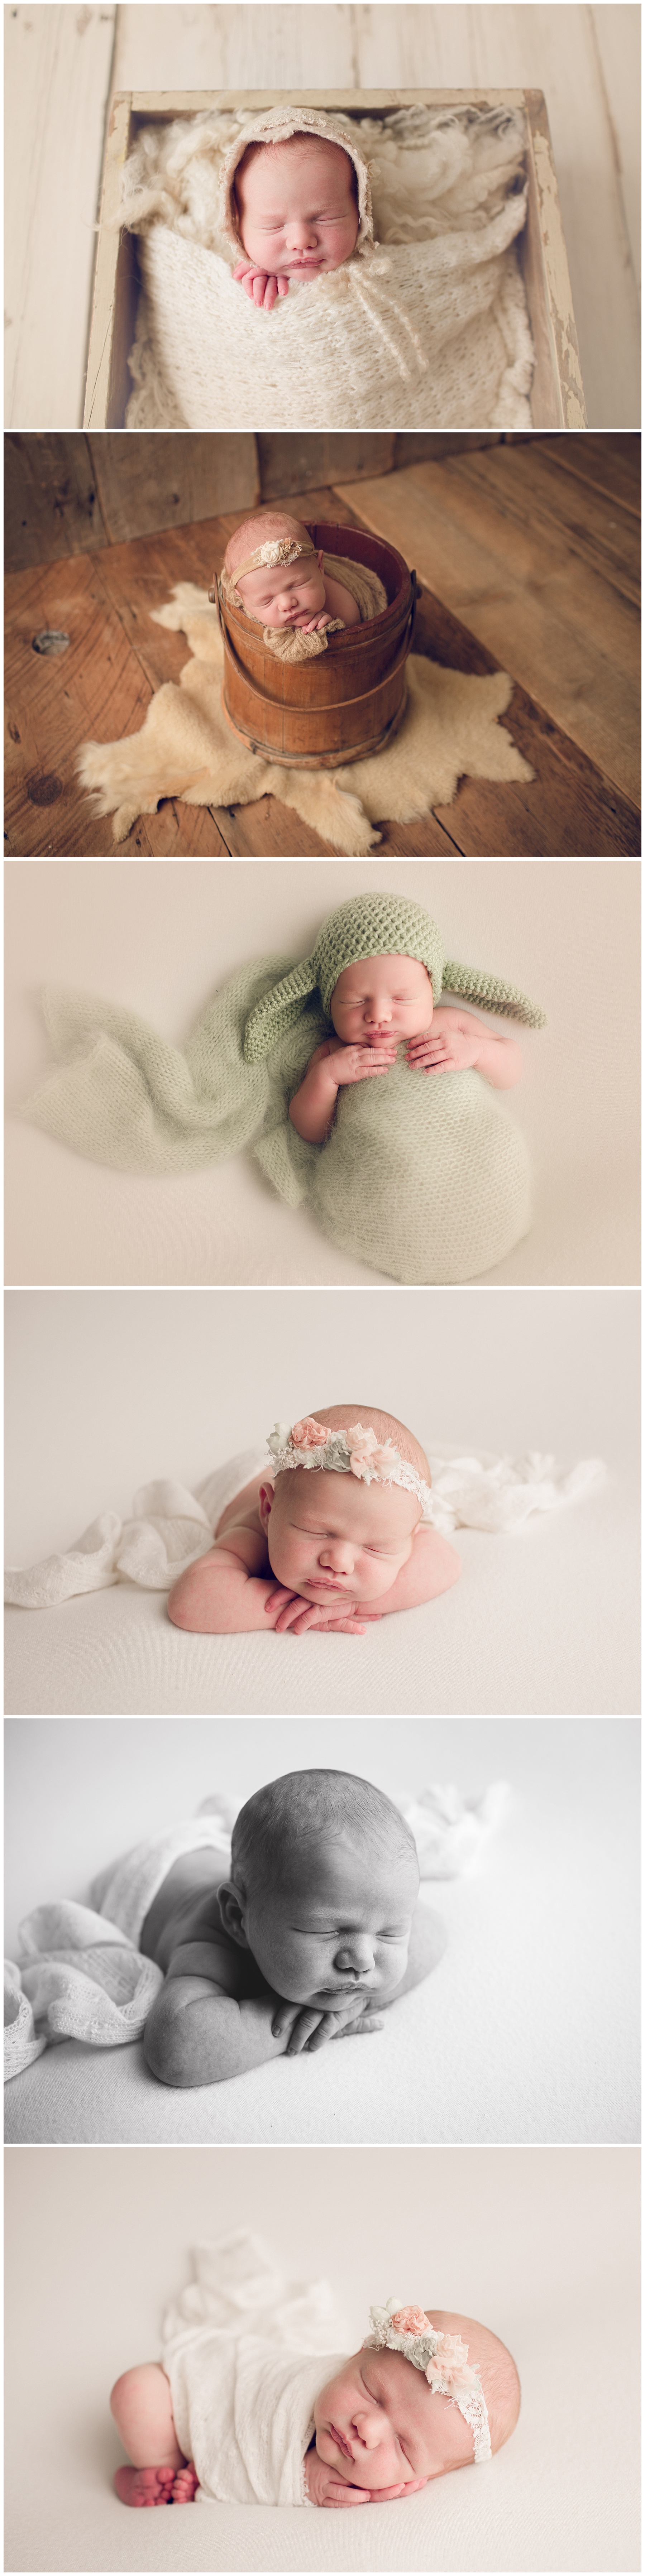 Noelle | Chicago Newborn Photographer | Patricia Anderson Photography